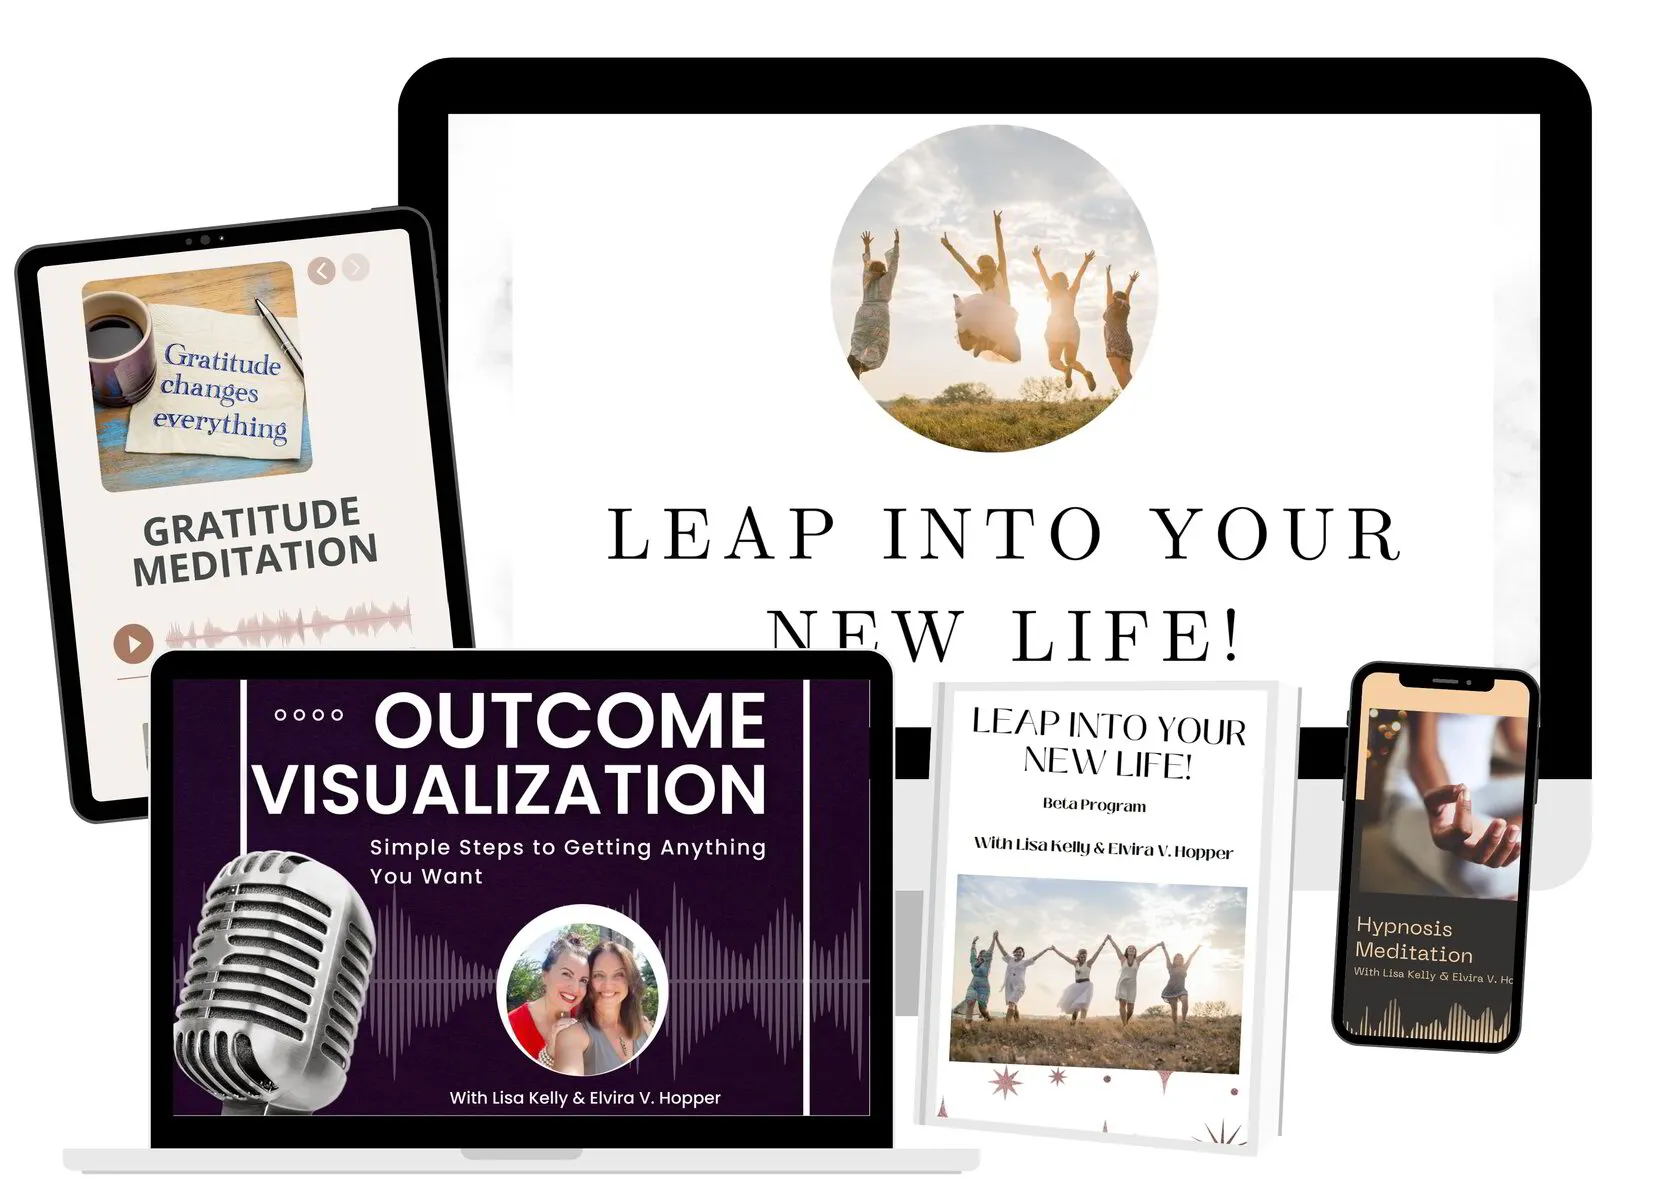 Leap Into Your New Life - 3 x $444 USD